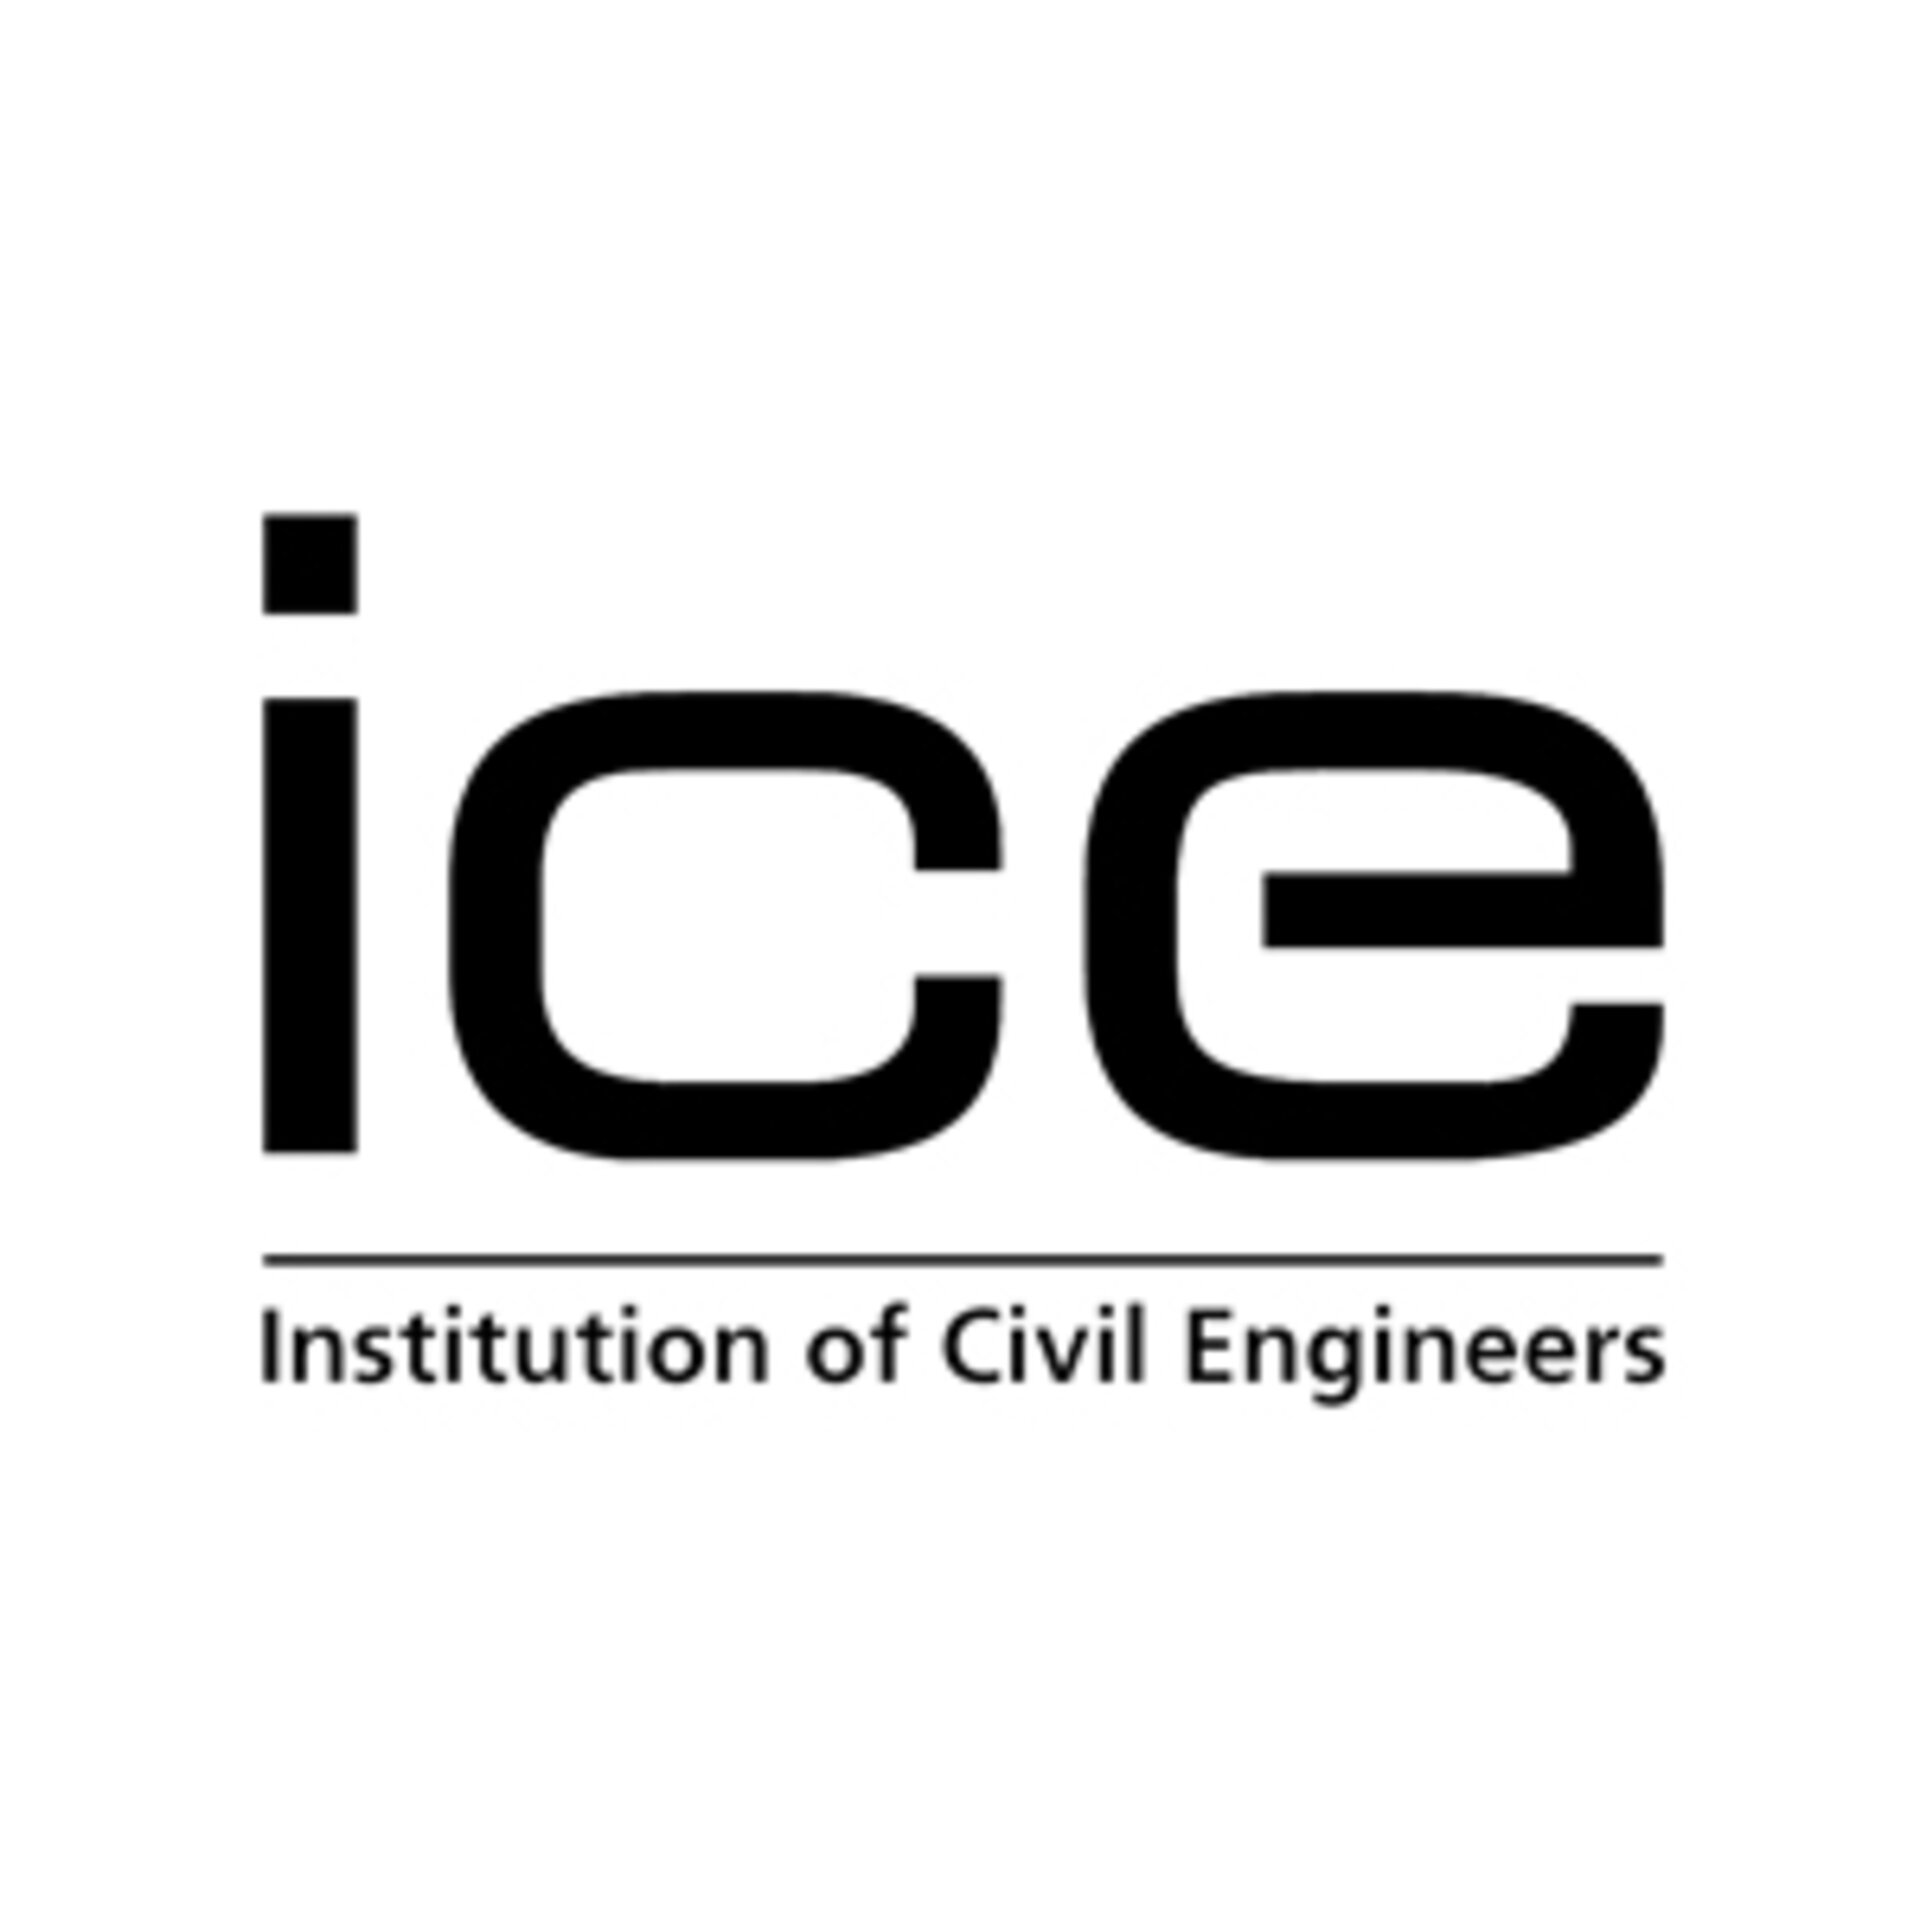 Institution of Civil Engineers (ICE) logo, with black text over a white background.